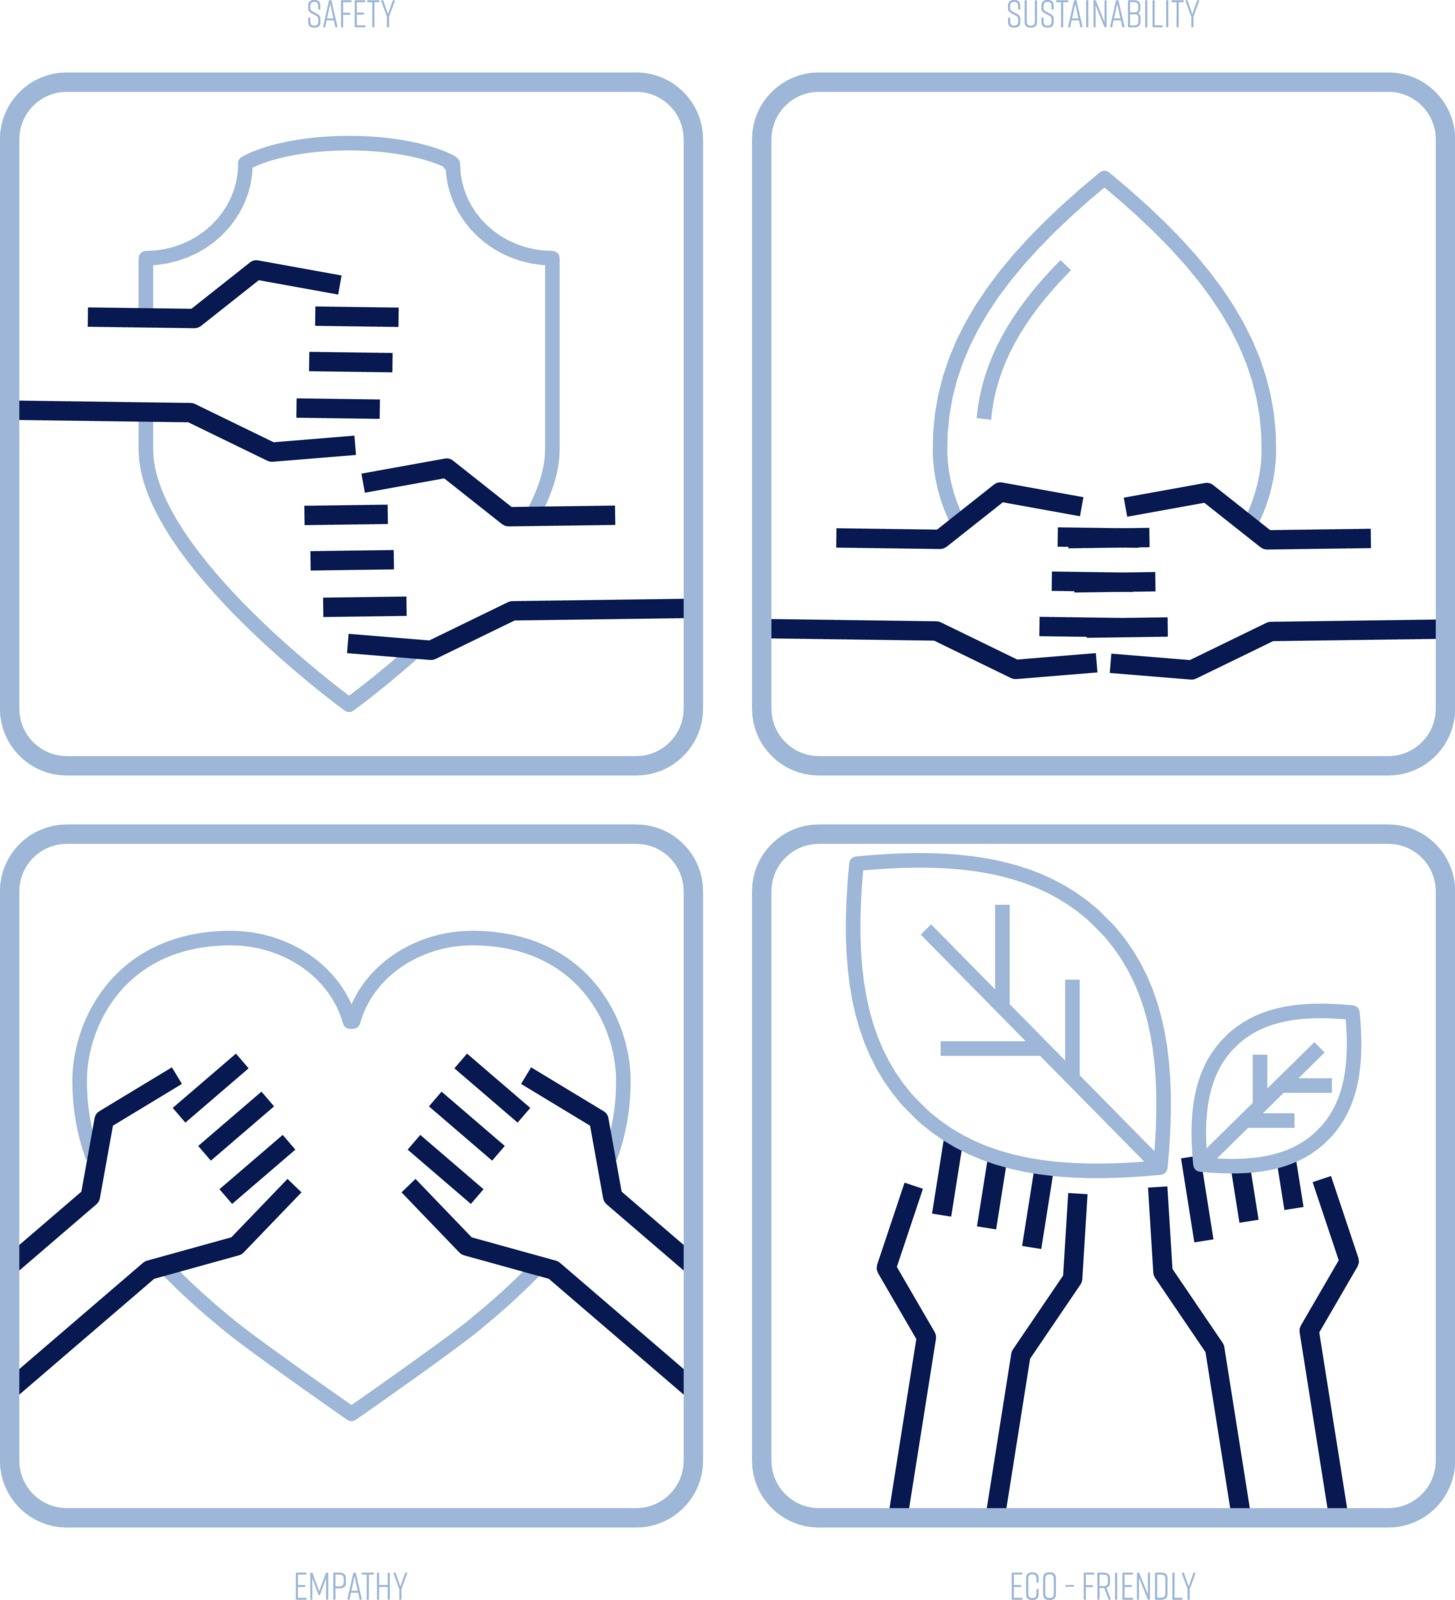 Set of hand performance represent social values: safety, sustainability, empathy and eco-friendly. Editable strokes, outline icon set. Vector illustration.